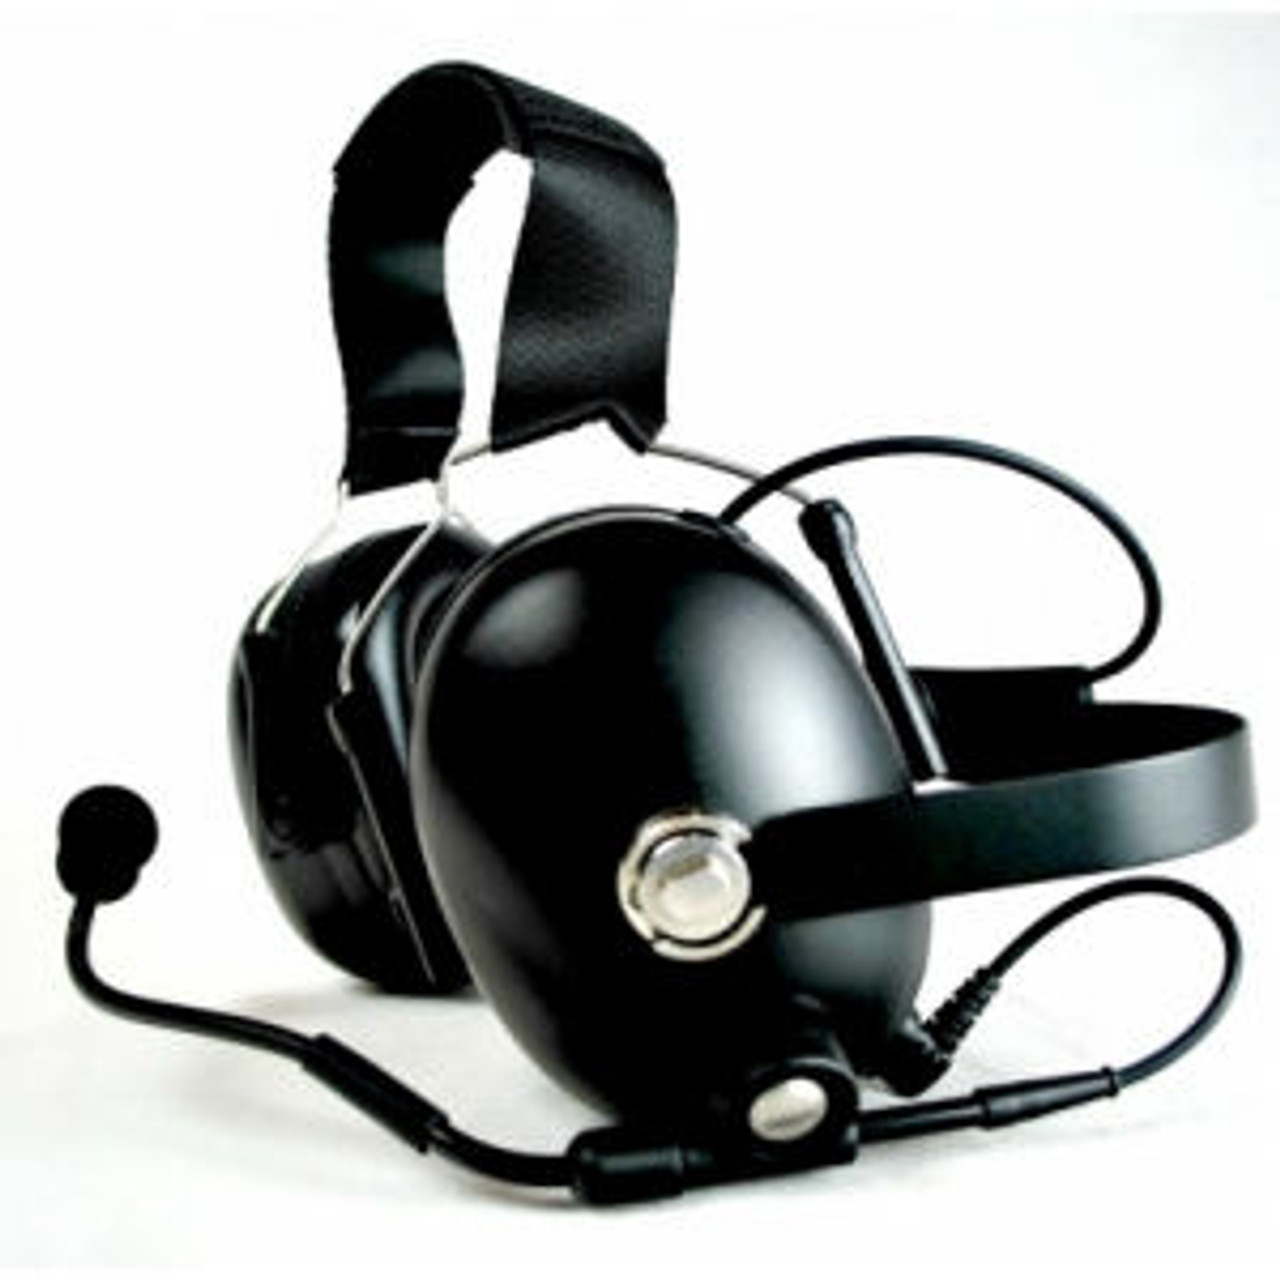 M/A-Com P5250 Noise Canceling Double Muff Behind The Head Headset